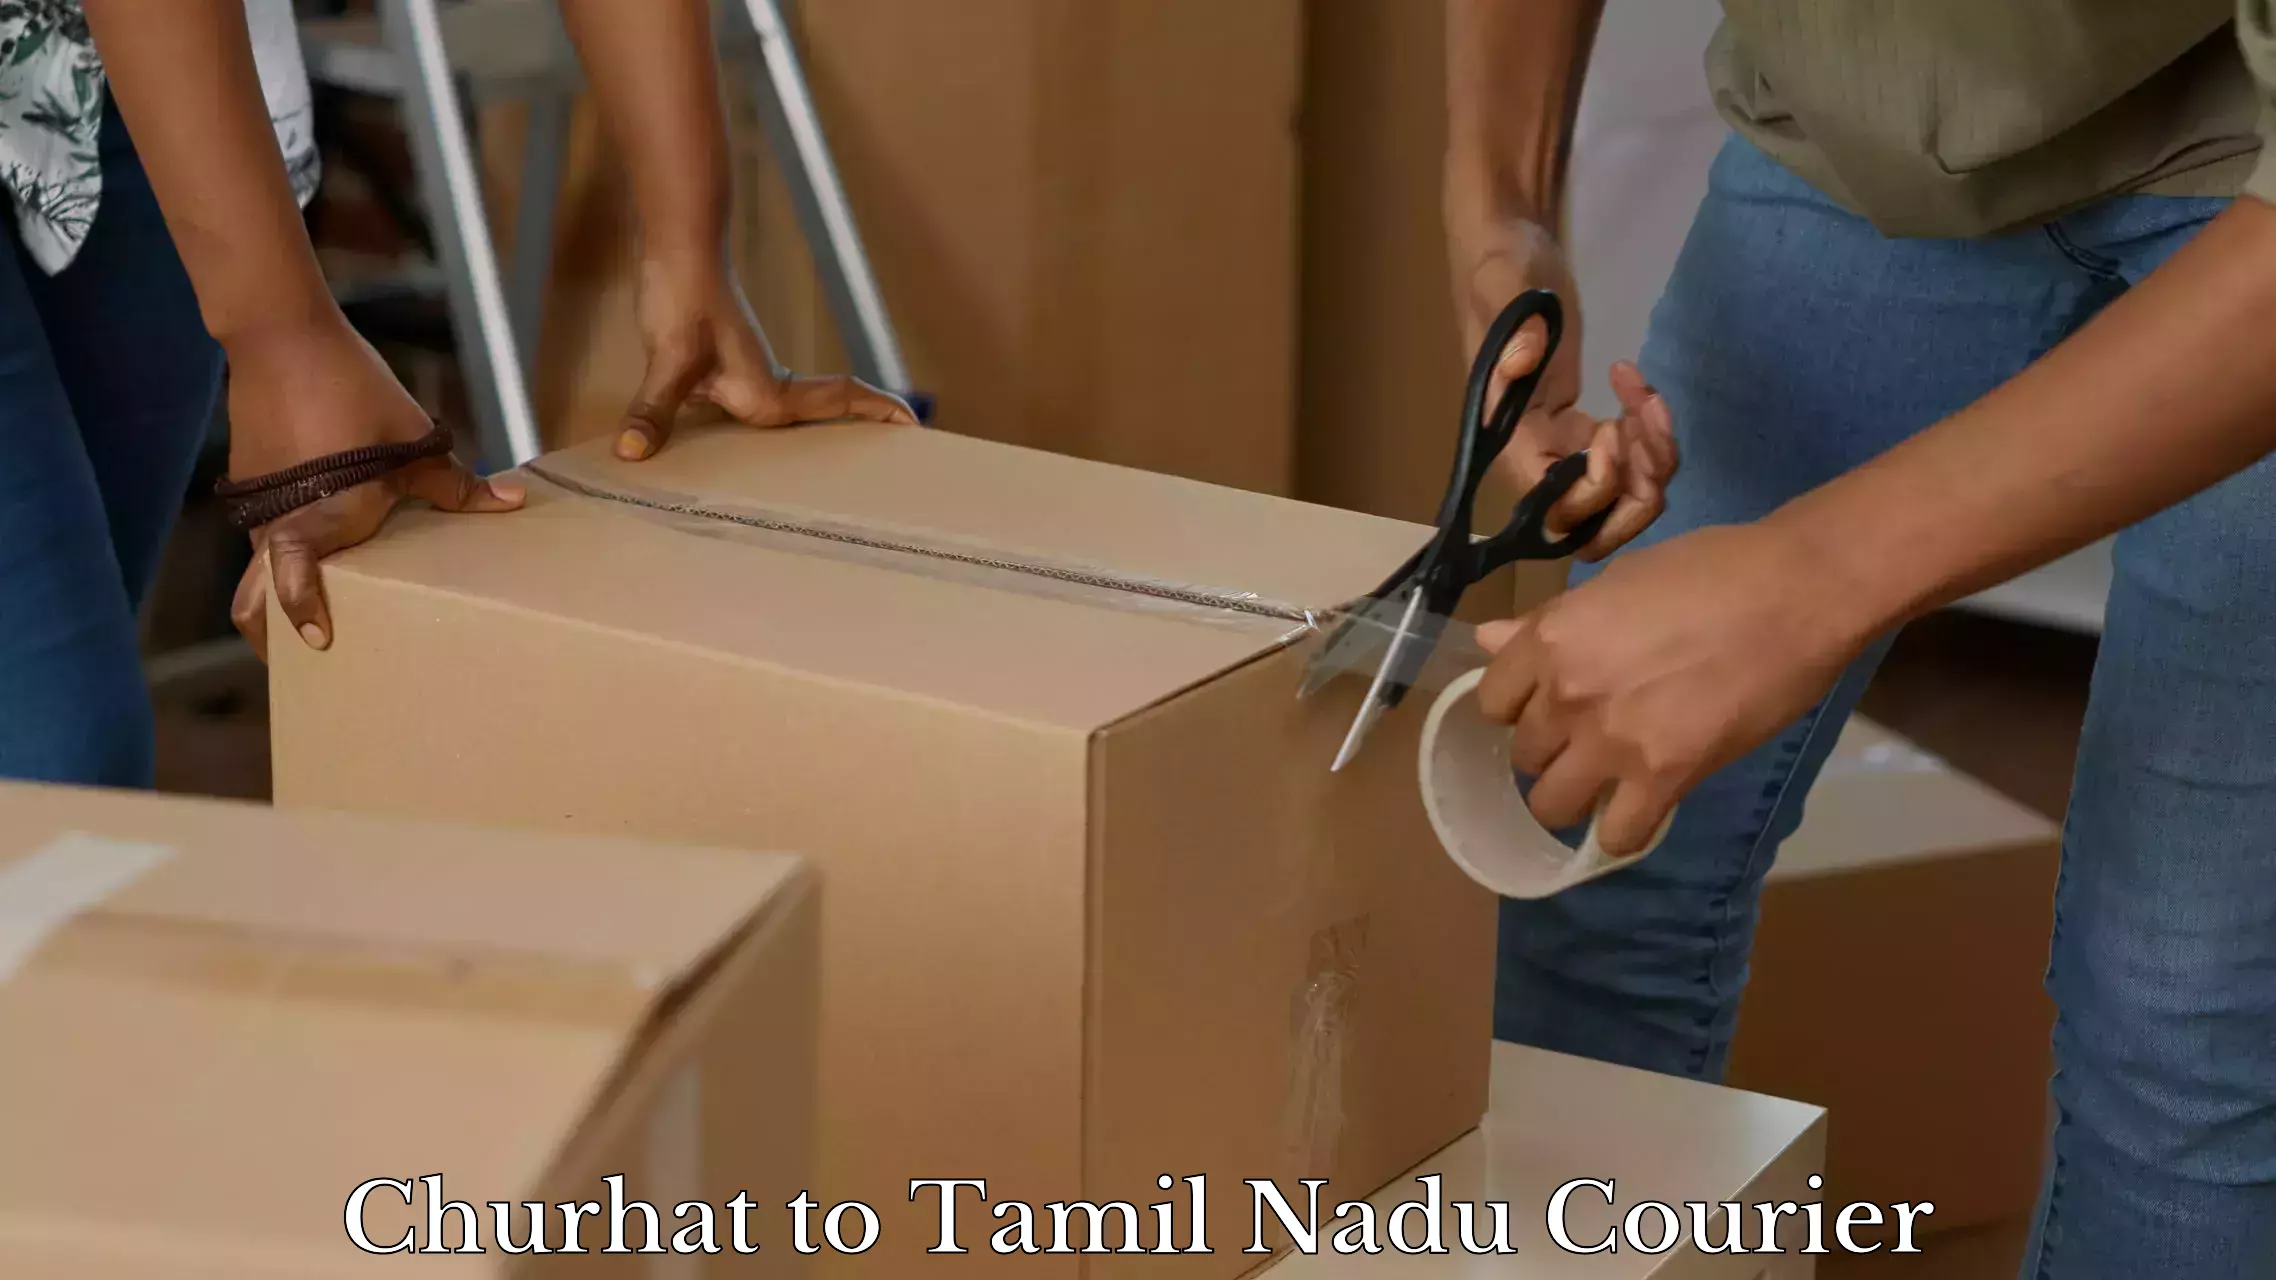 Reliable baggage delivery Churhat to Tamil Nadu